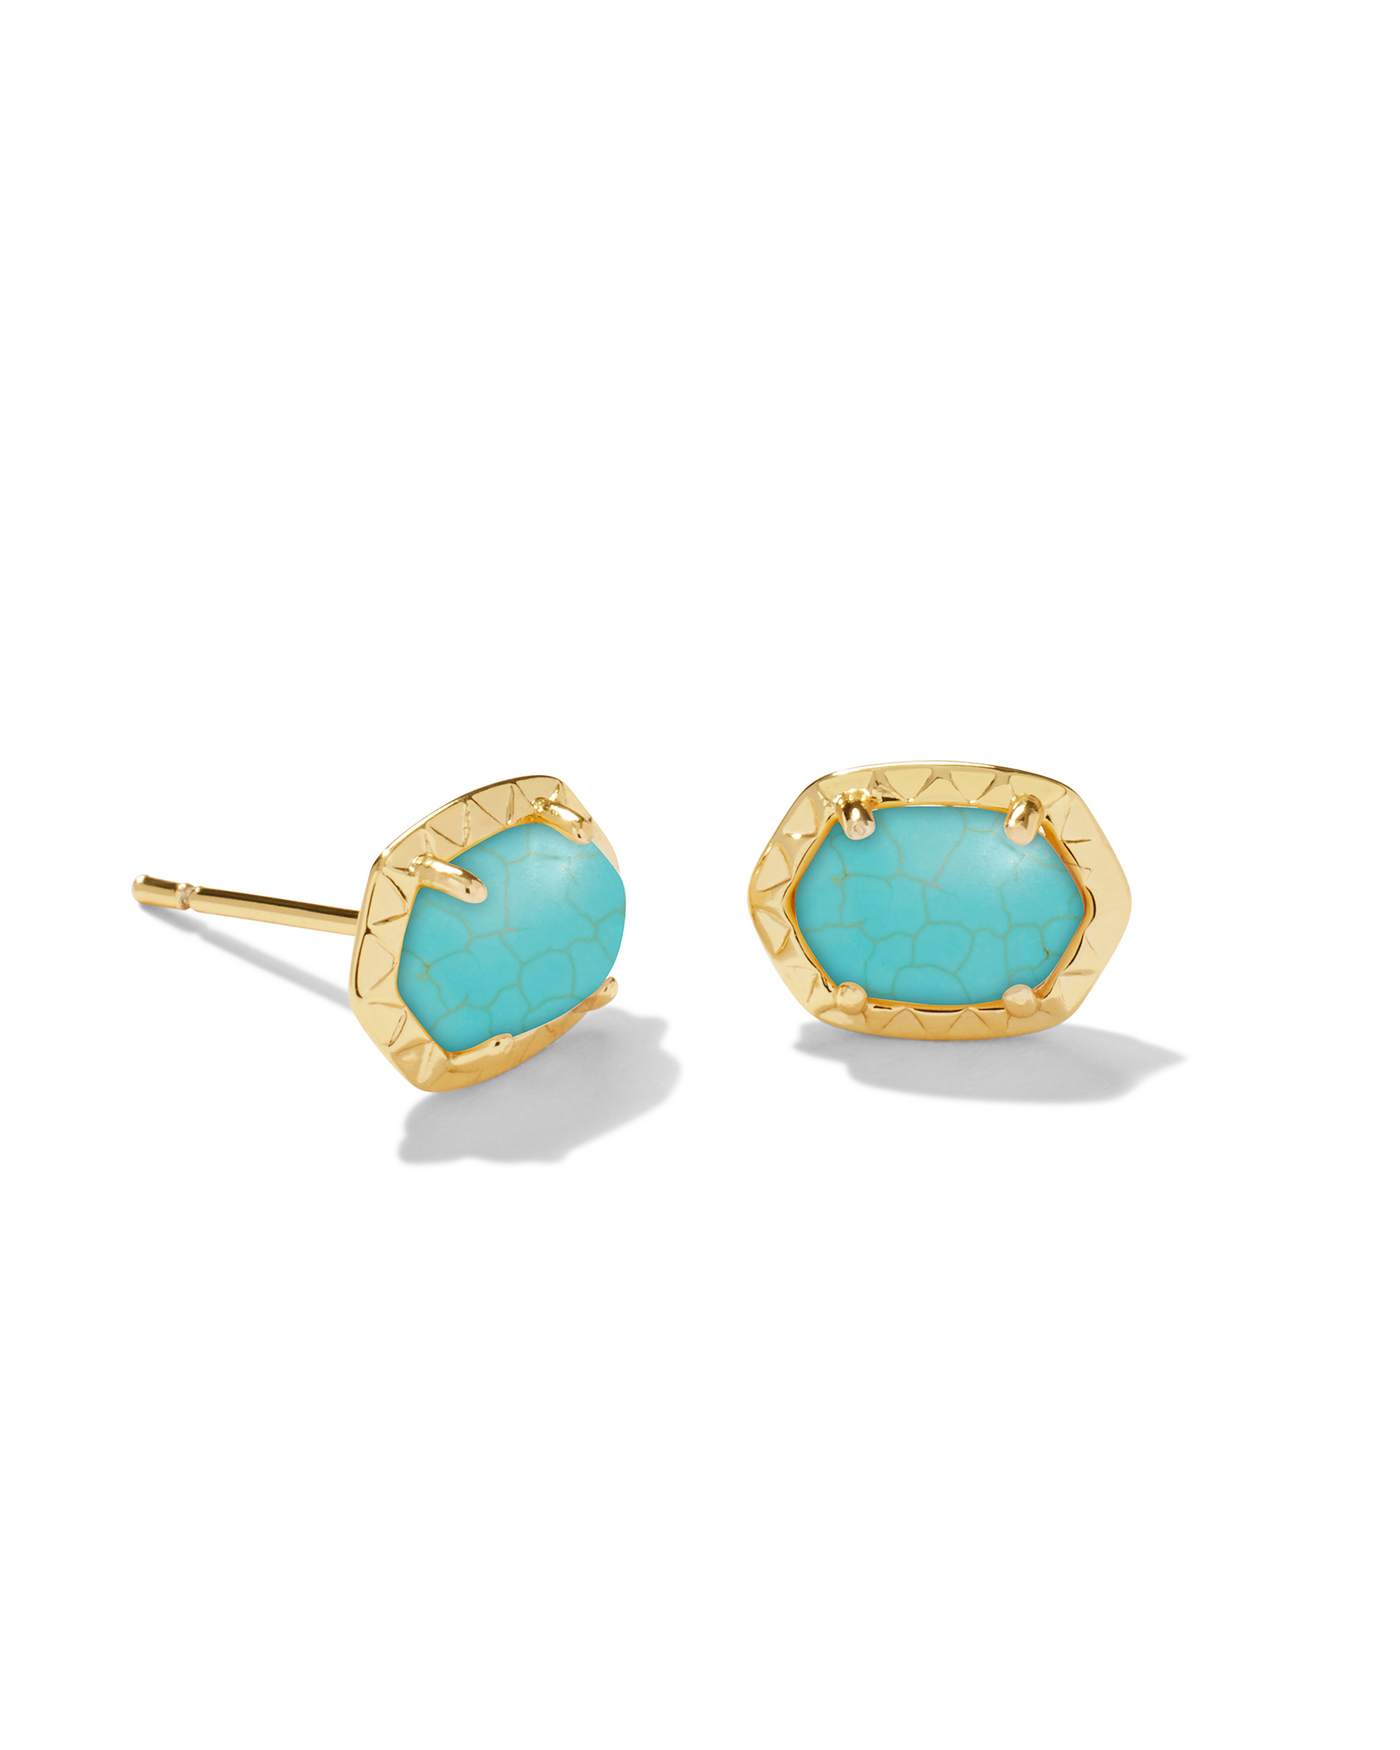 Gold Tone Earrings Featuring Blue/Green Variegated Turquoise Magnesite by Kendra Scott